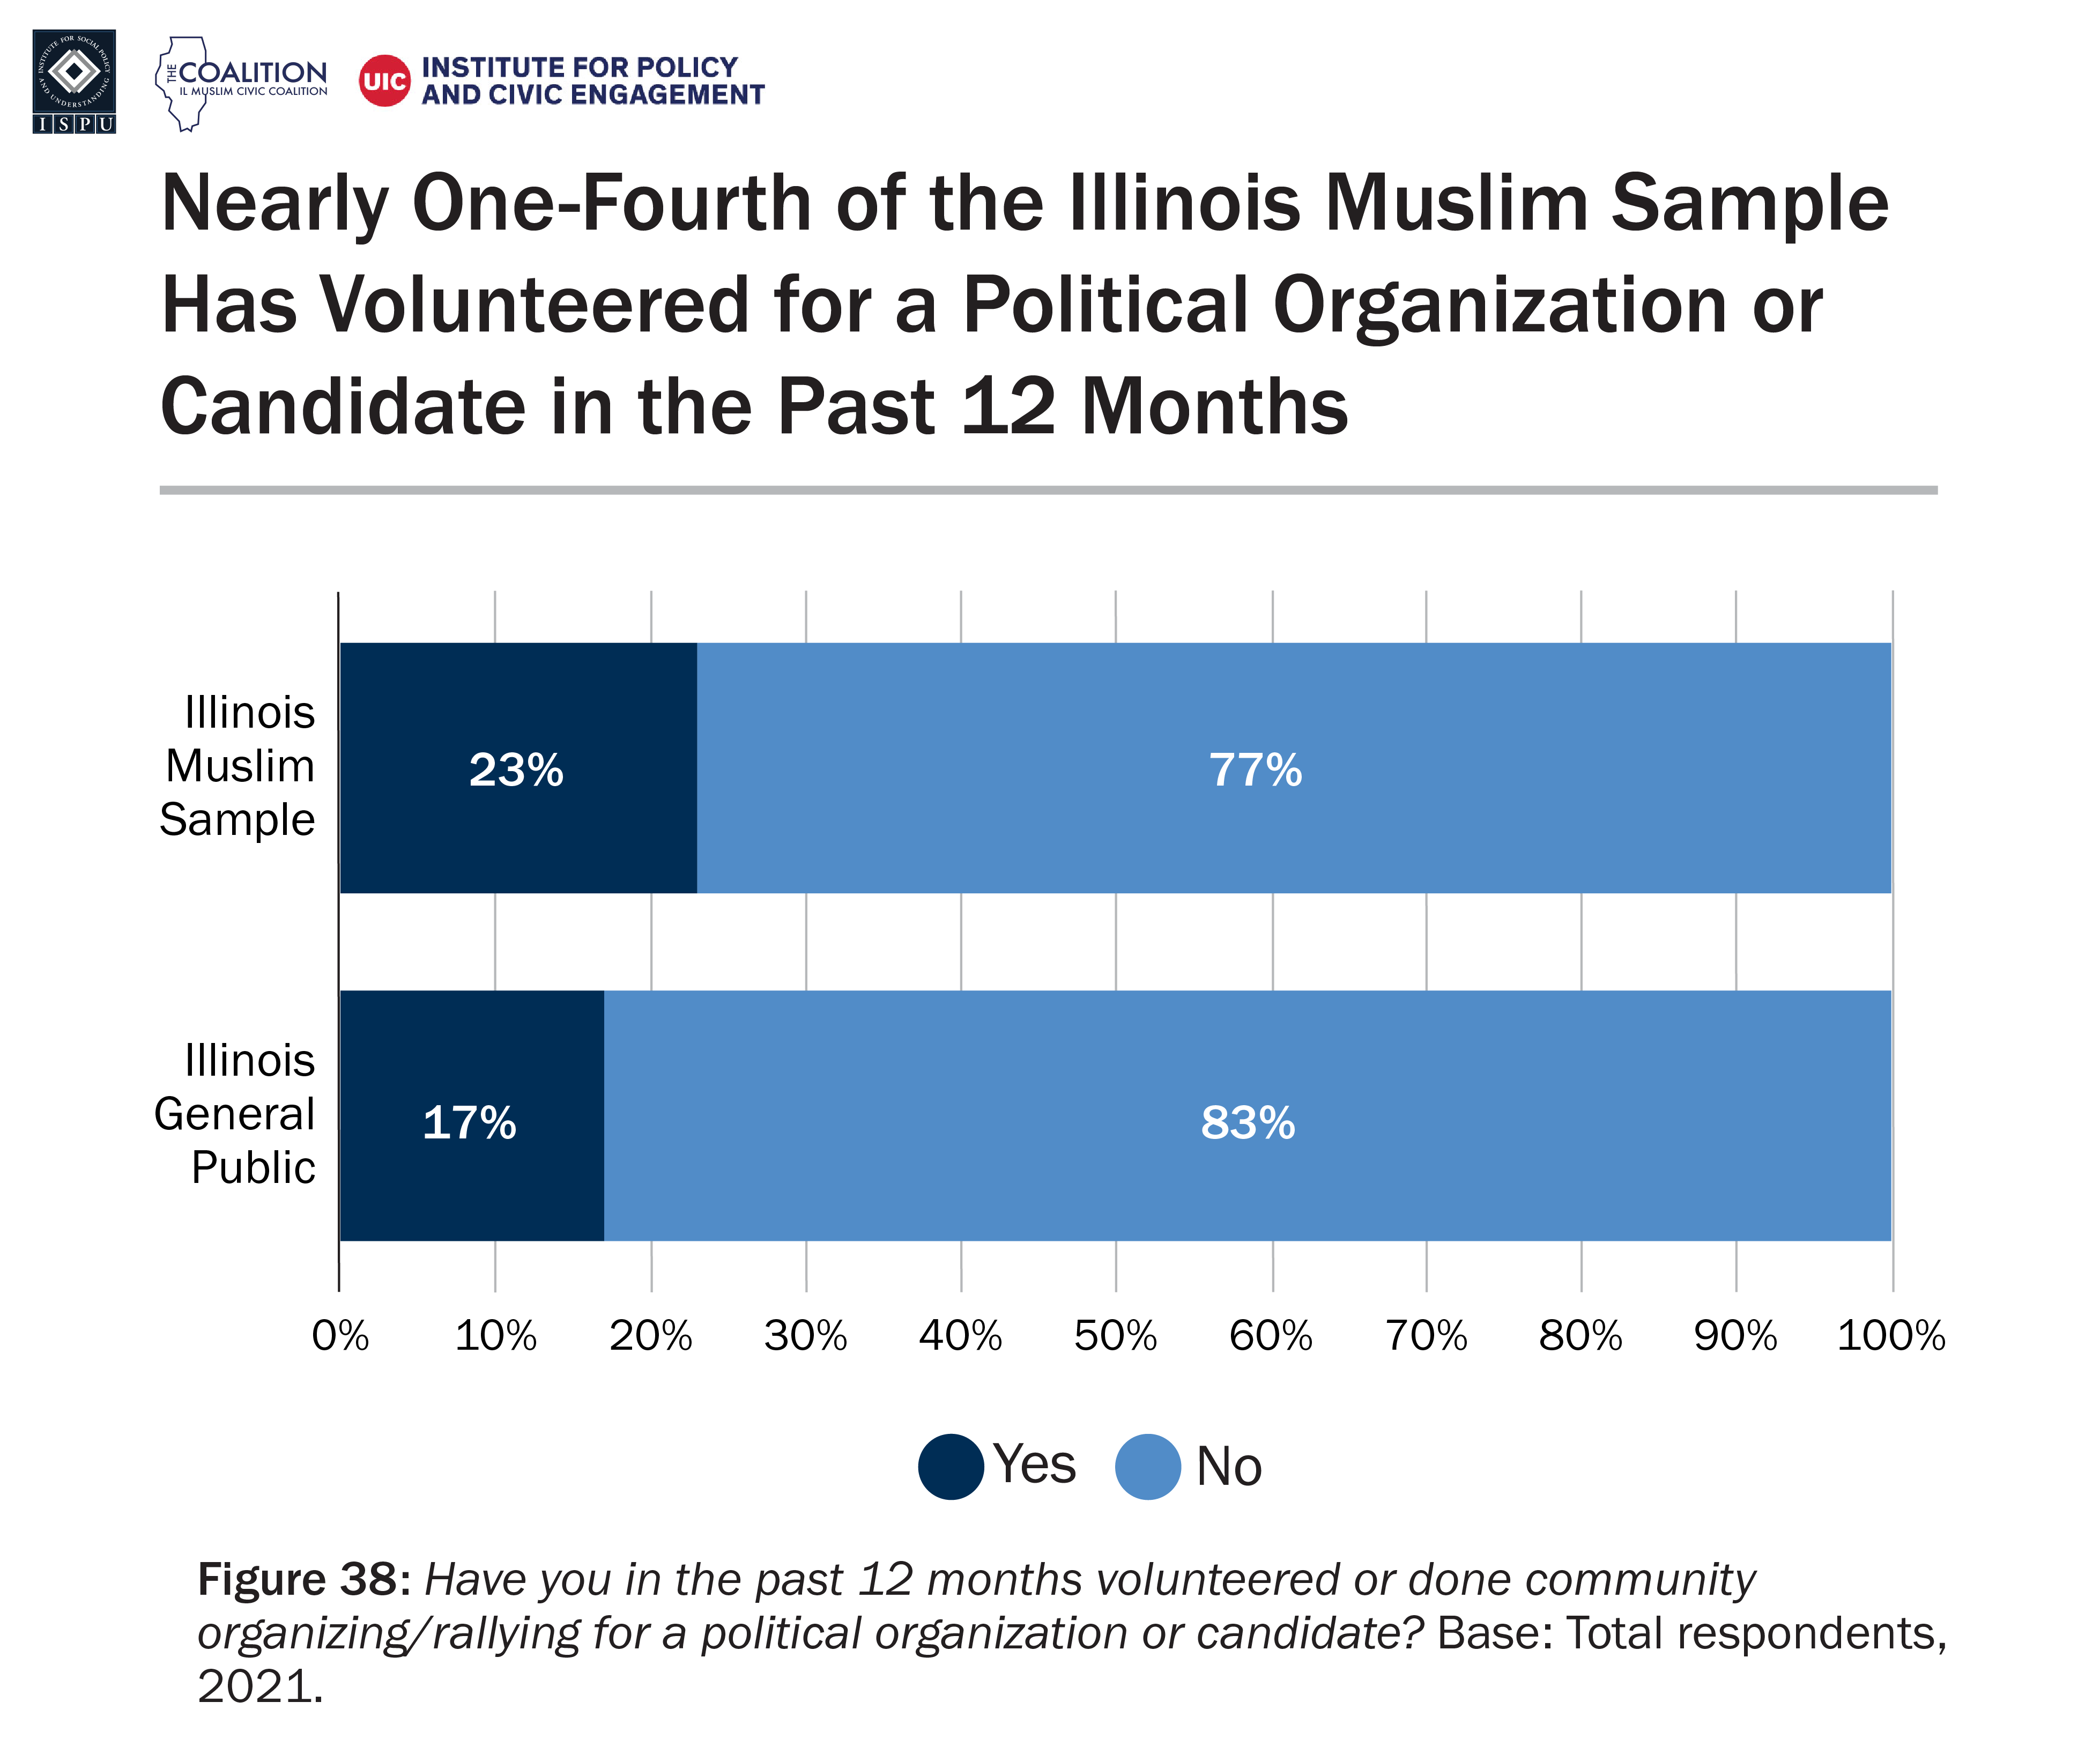 A bar graph showing the proportion of the Illinois Muslim sample and Illinois general public who have volunteered or done community organizing in the past 12 months for a political organization or candidate